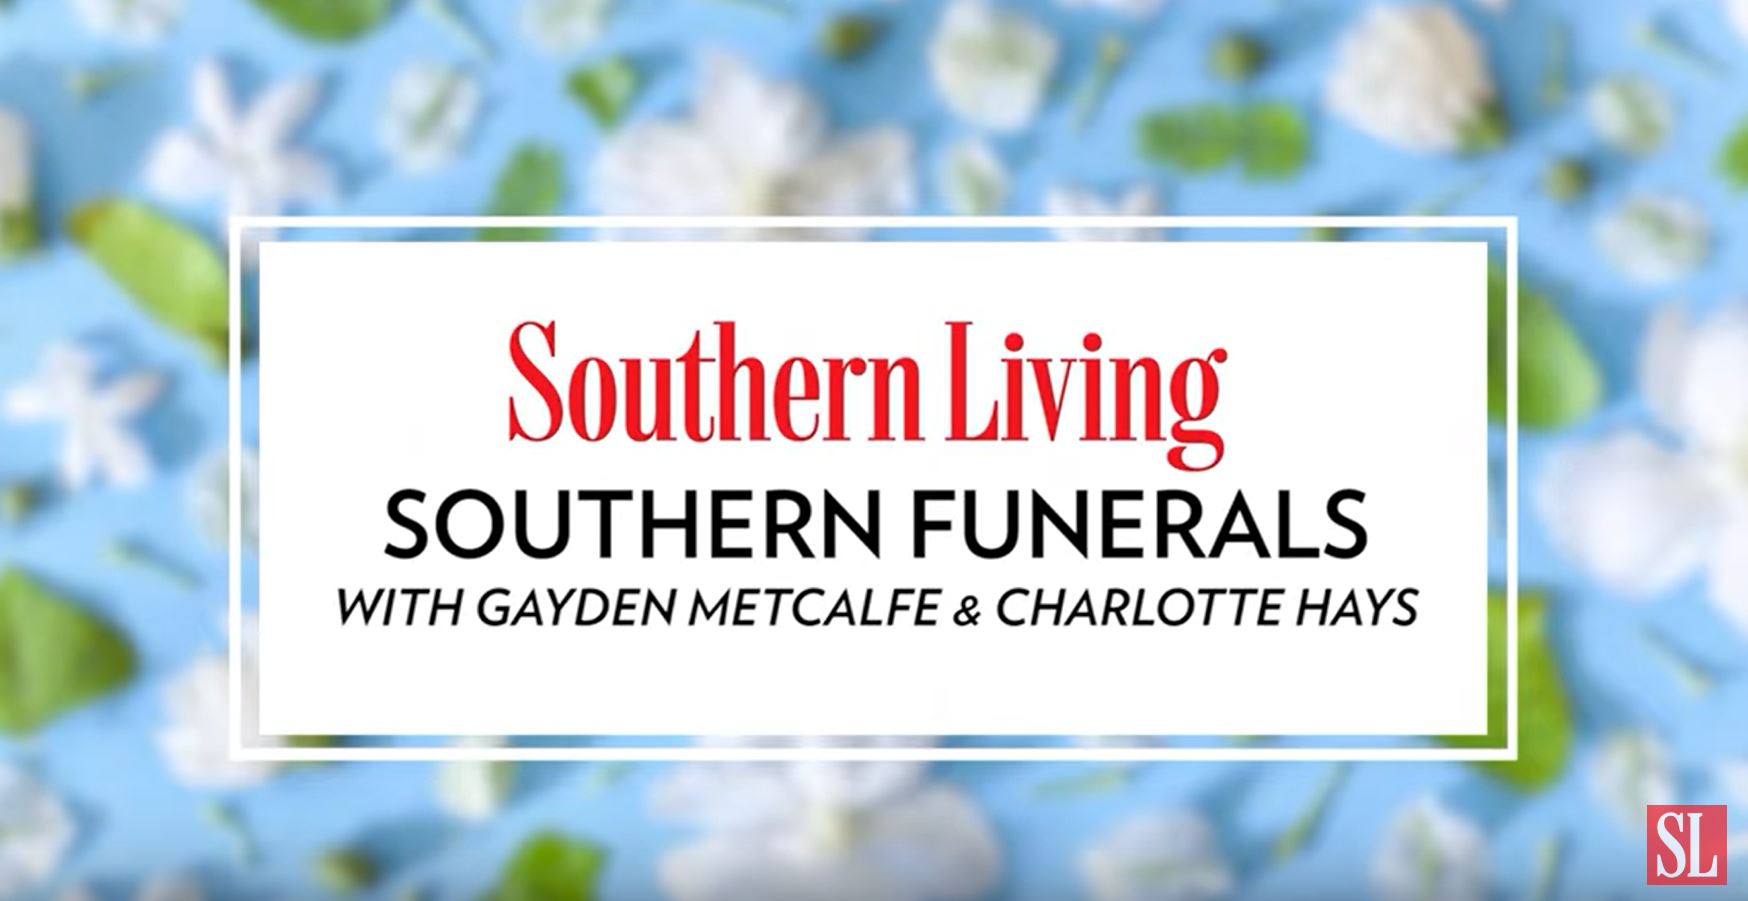 Southern Living Southern Funerals